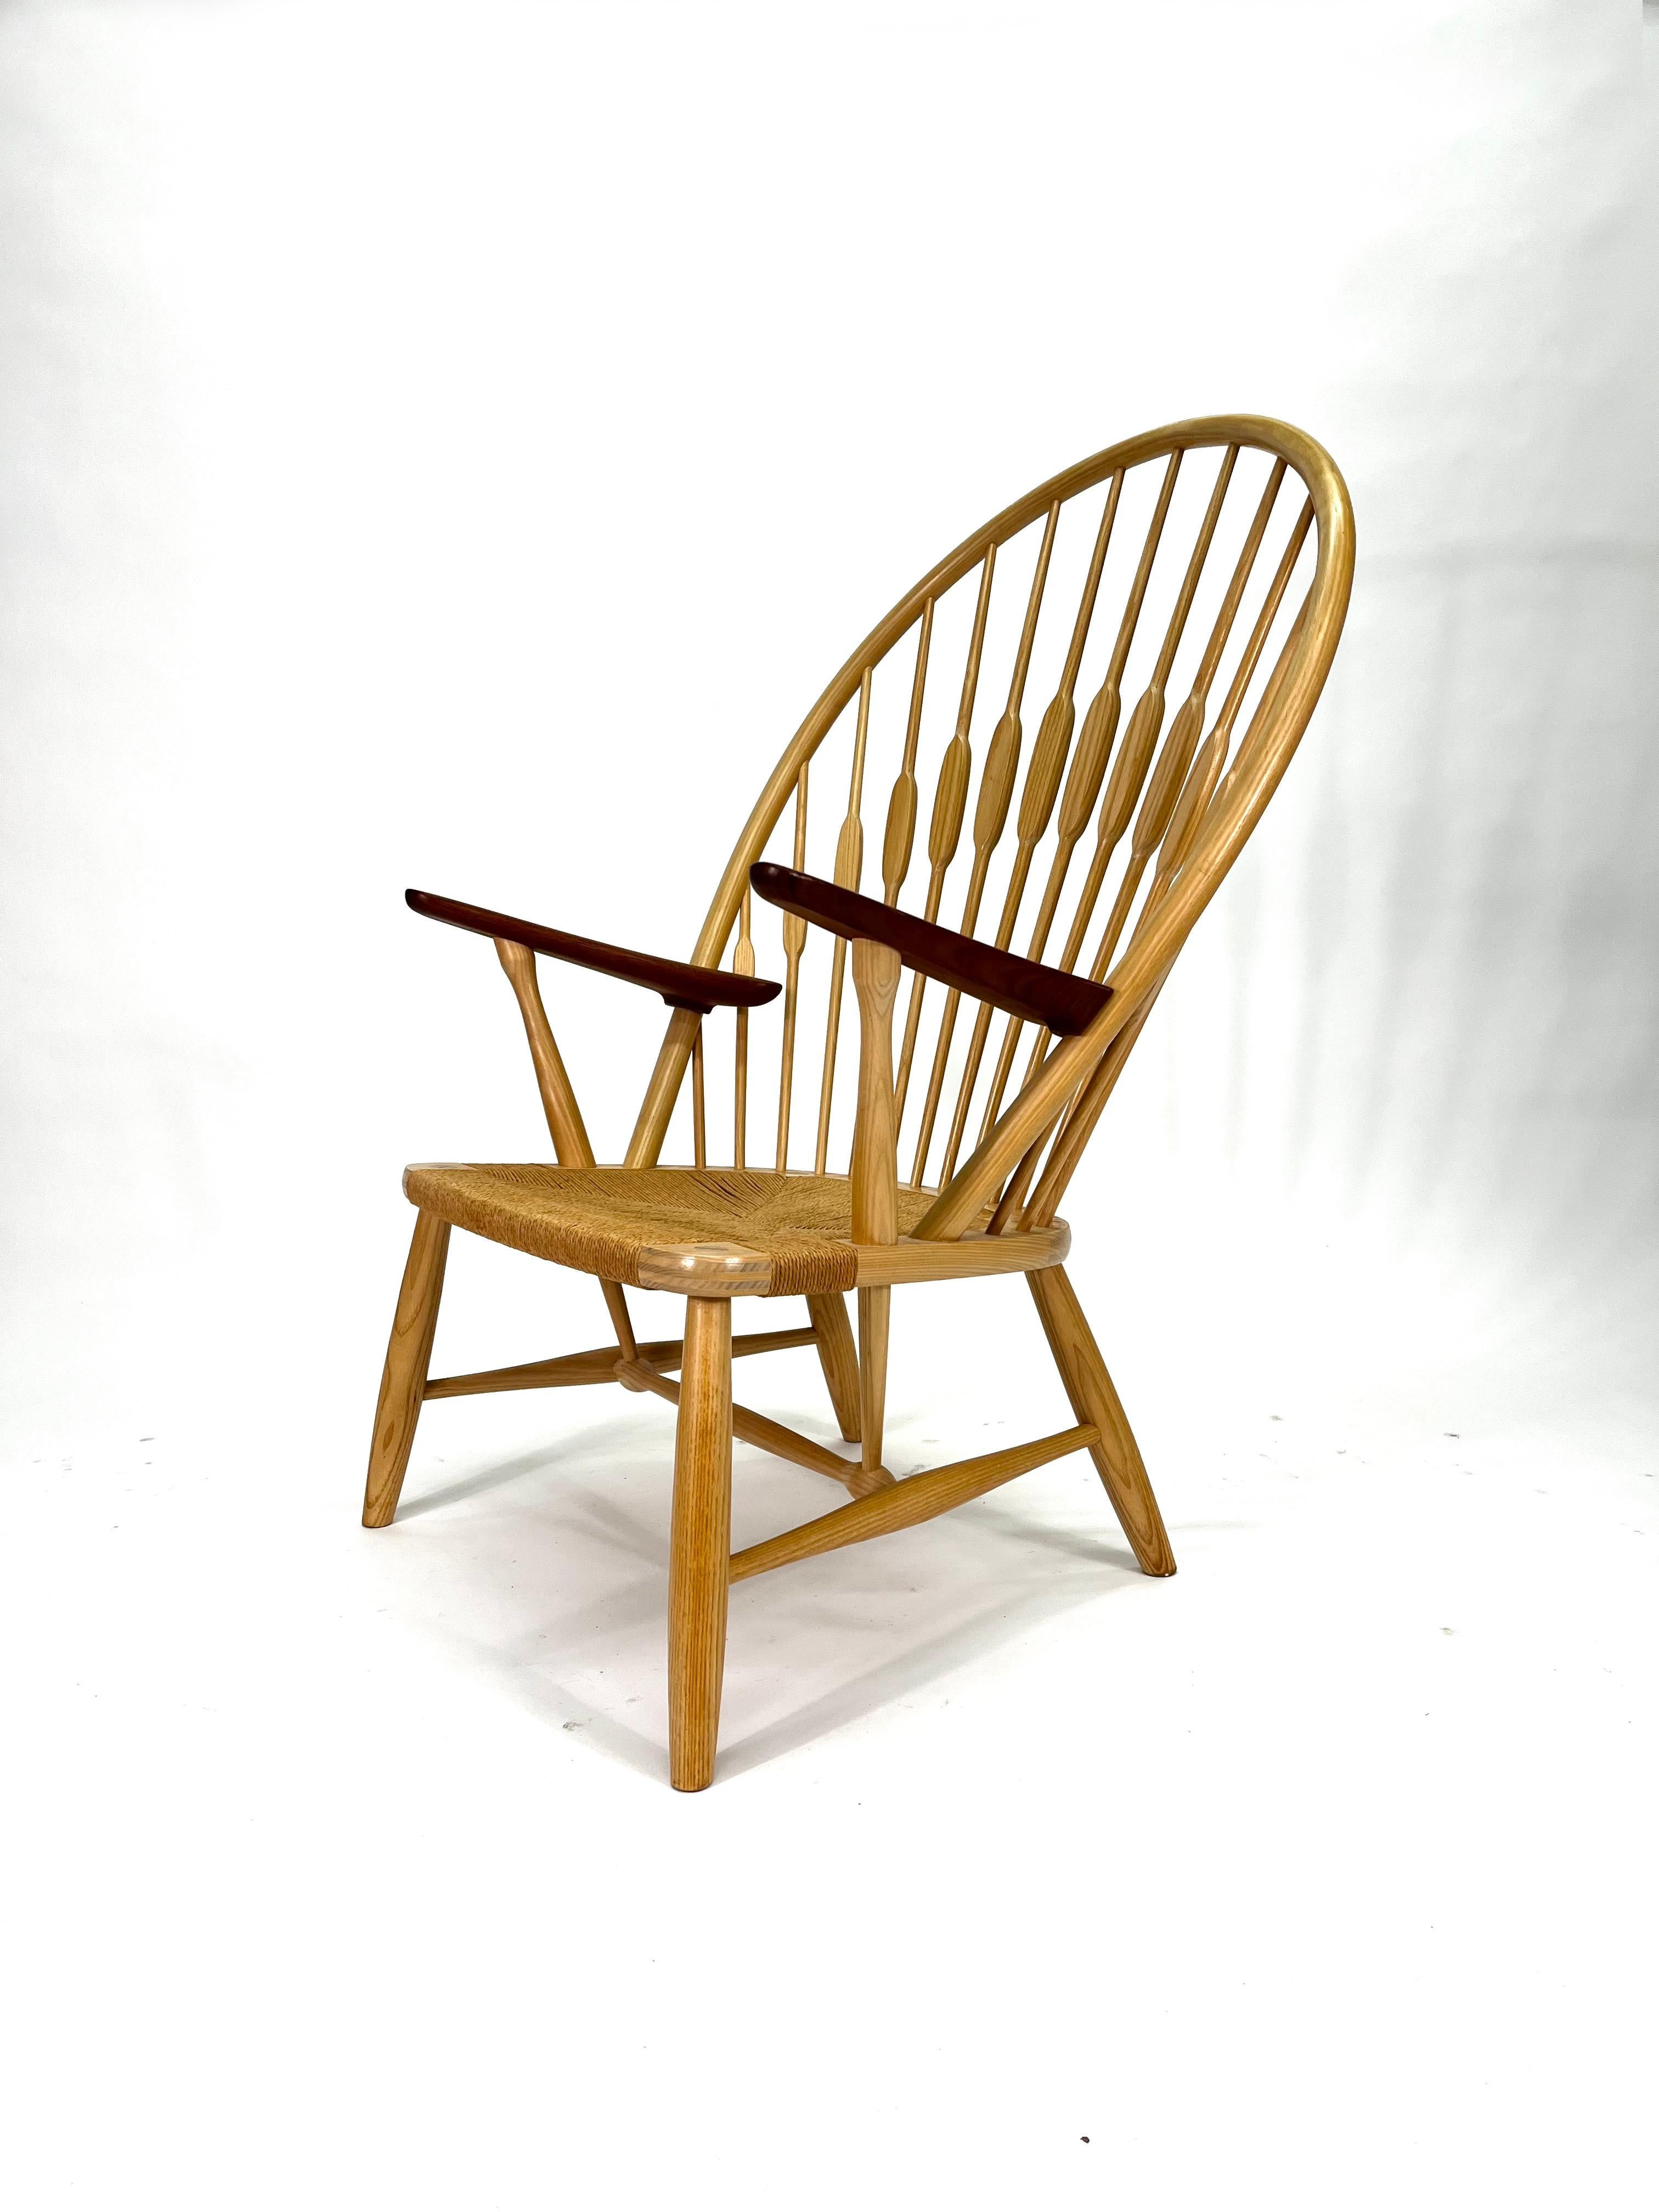 Peacock Chair designed by Hans J. Wegner for PP Møbler is an easy chair with a natural papercord seat. The Peacock Chair is historically anchored in the classic British Windsor Chair. As were the case with many of his early works, Wegner updated his